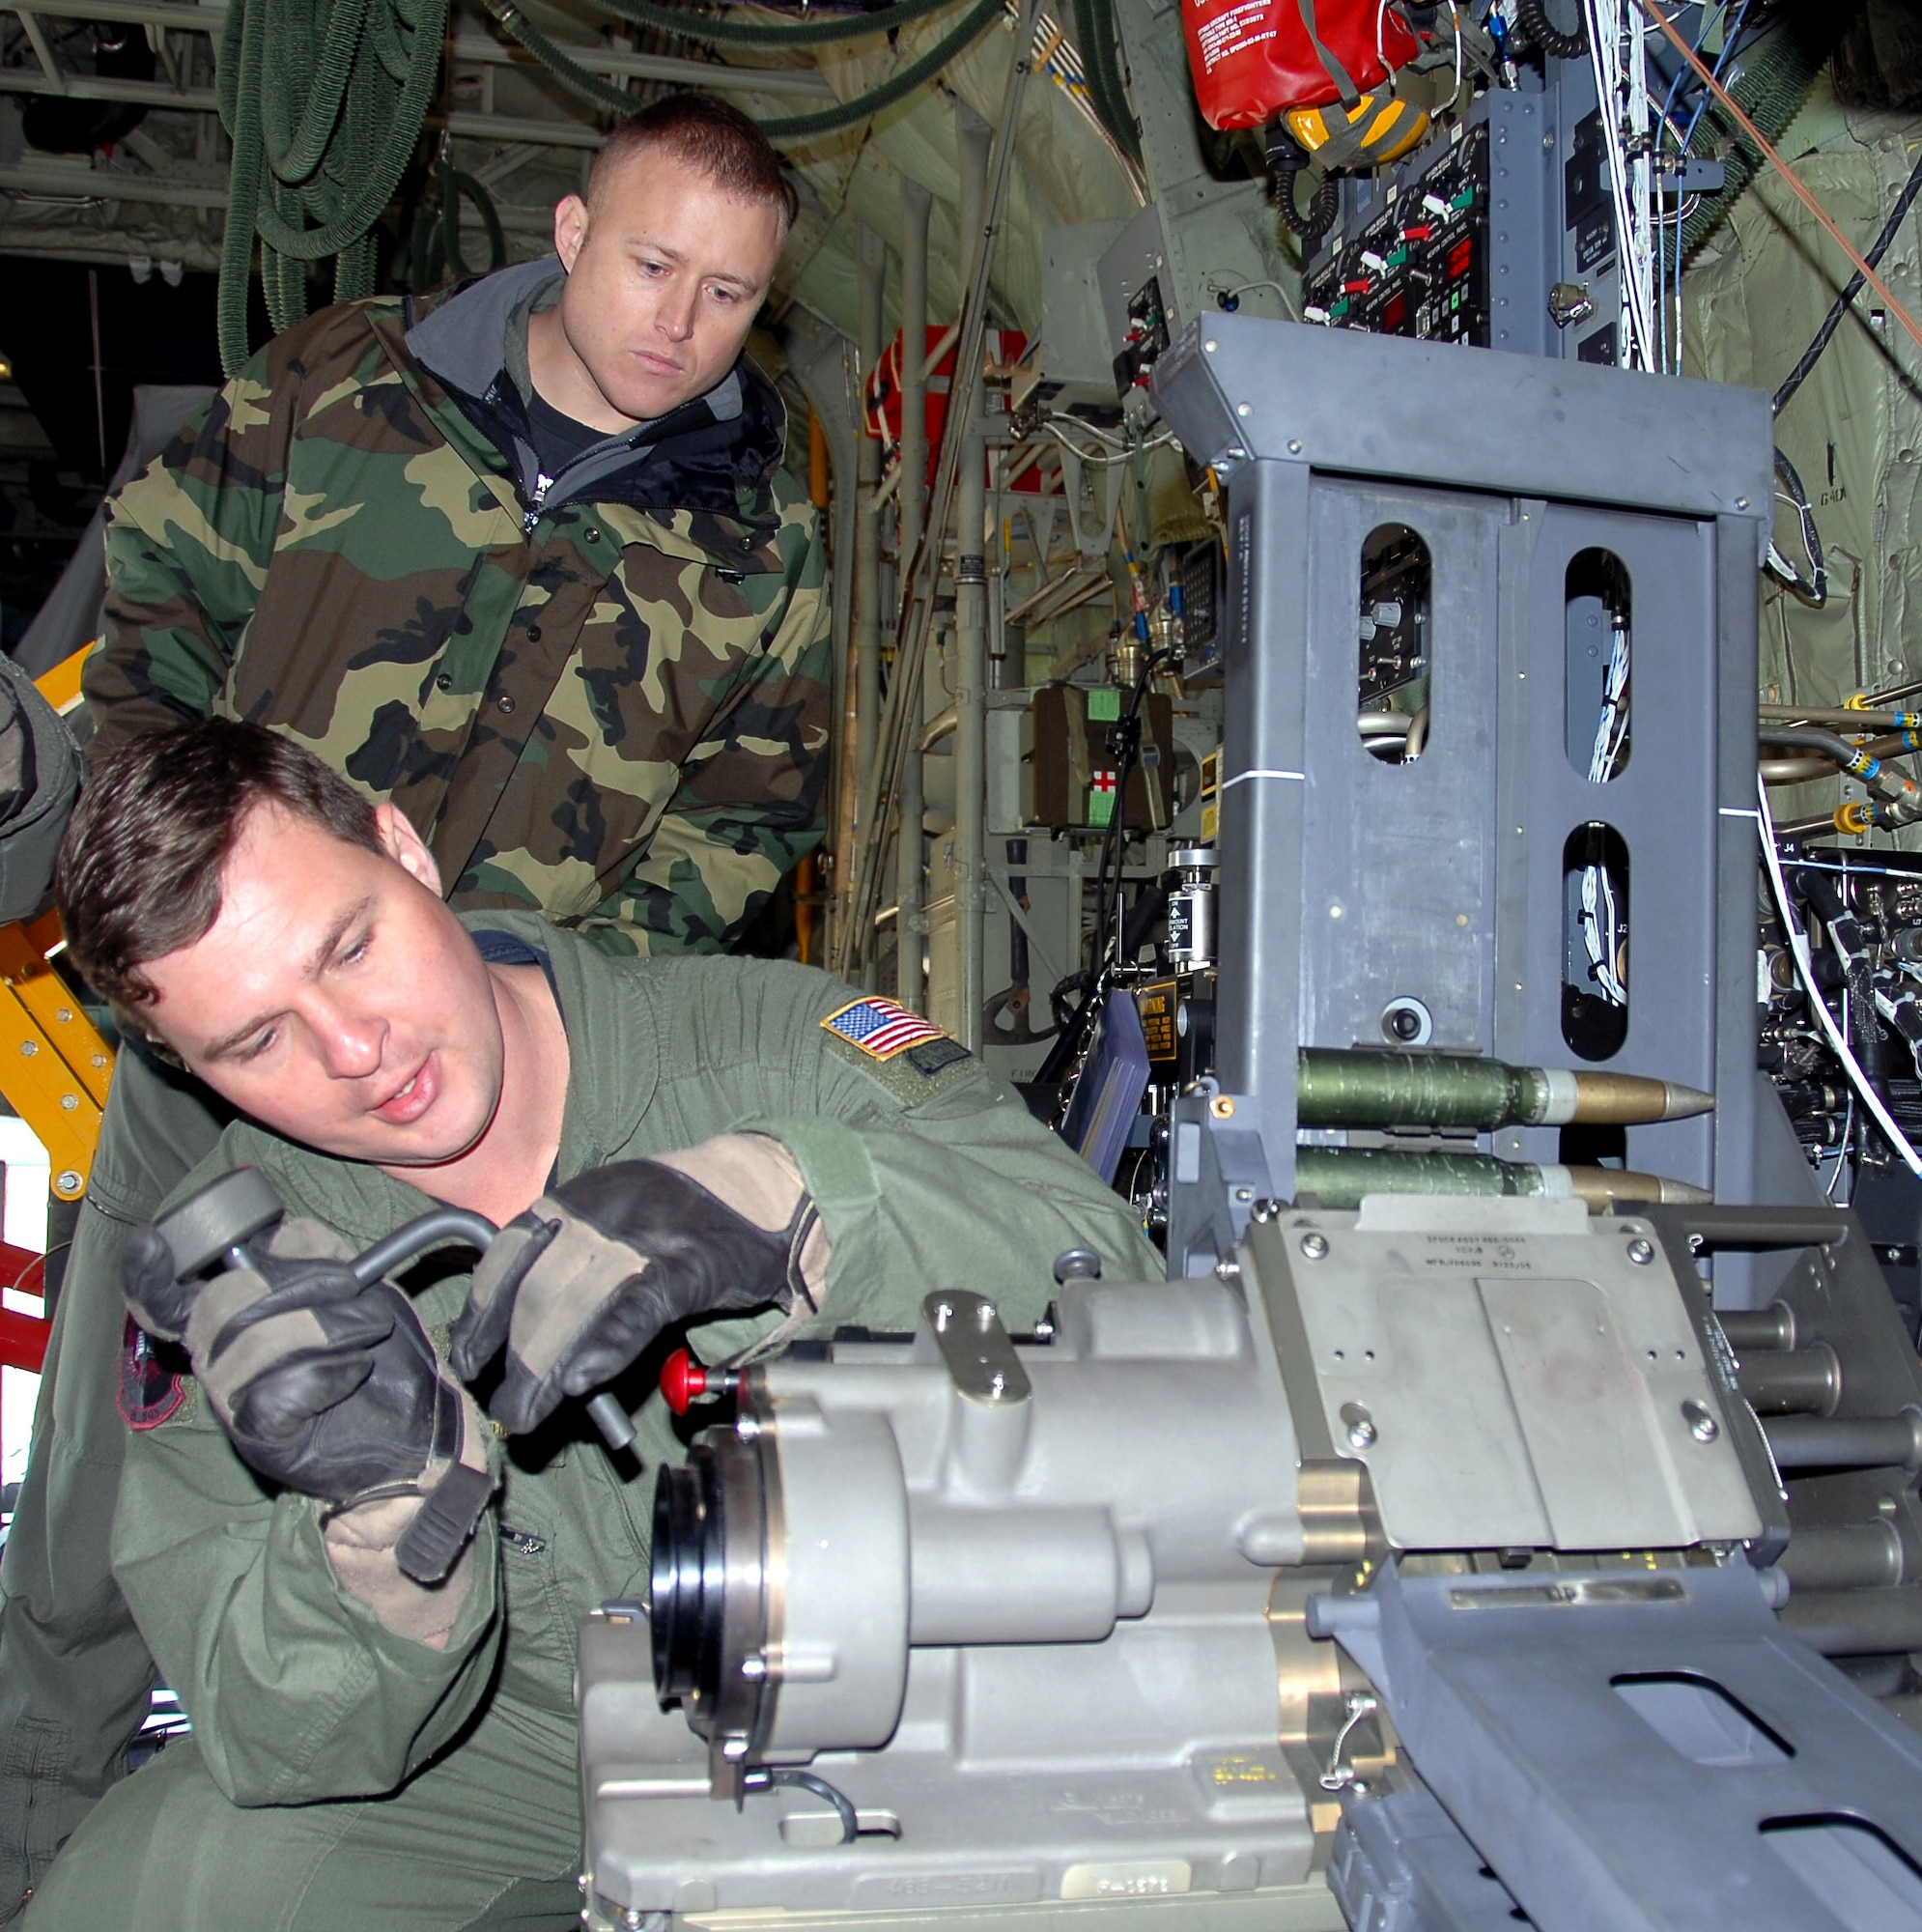 Tech. Sgt. Ben Filek works on a newly-installed 30 mm Bushmaster cannon aboard an AC-130U Spooky gunship as Tech. Sgt. James Knight looks on Jan. 26 at Hurlburt Field, Fla. Both Airmen are aerial gunners with the 19th Special Operations Squadron at Hurlburt Field. The 30 mm gun will eventually replace both the 40 mm cannon and 25 mm gun on U-model gunships. (U.S. Air Force photo/Chief Master Sgt. Gary Emery)